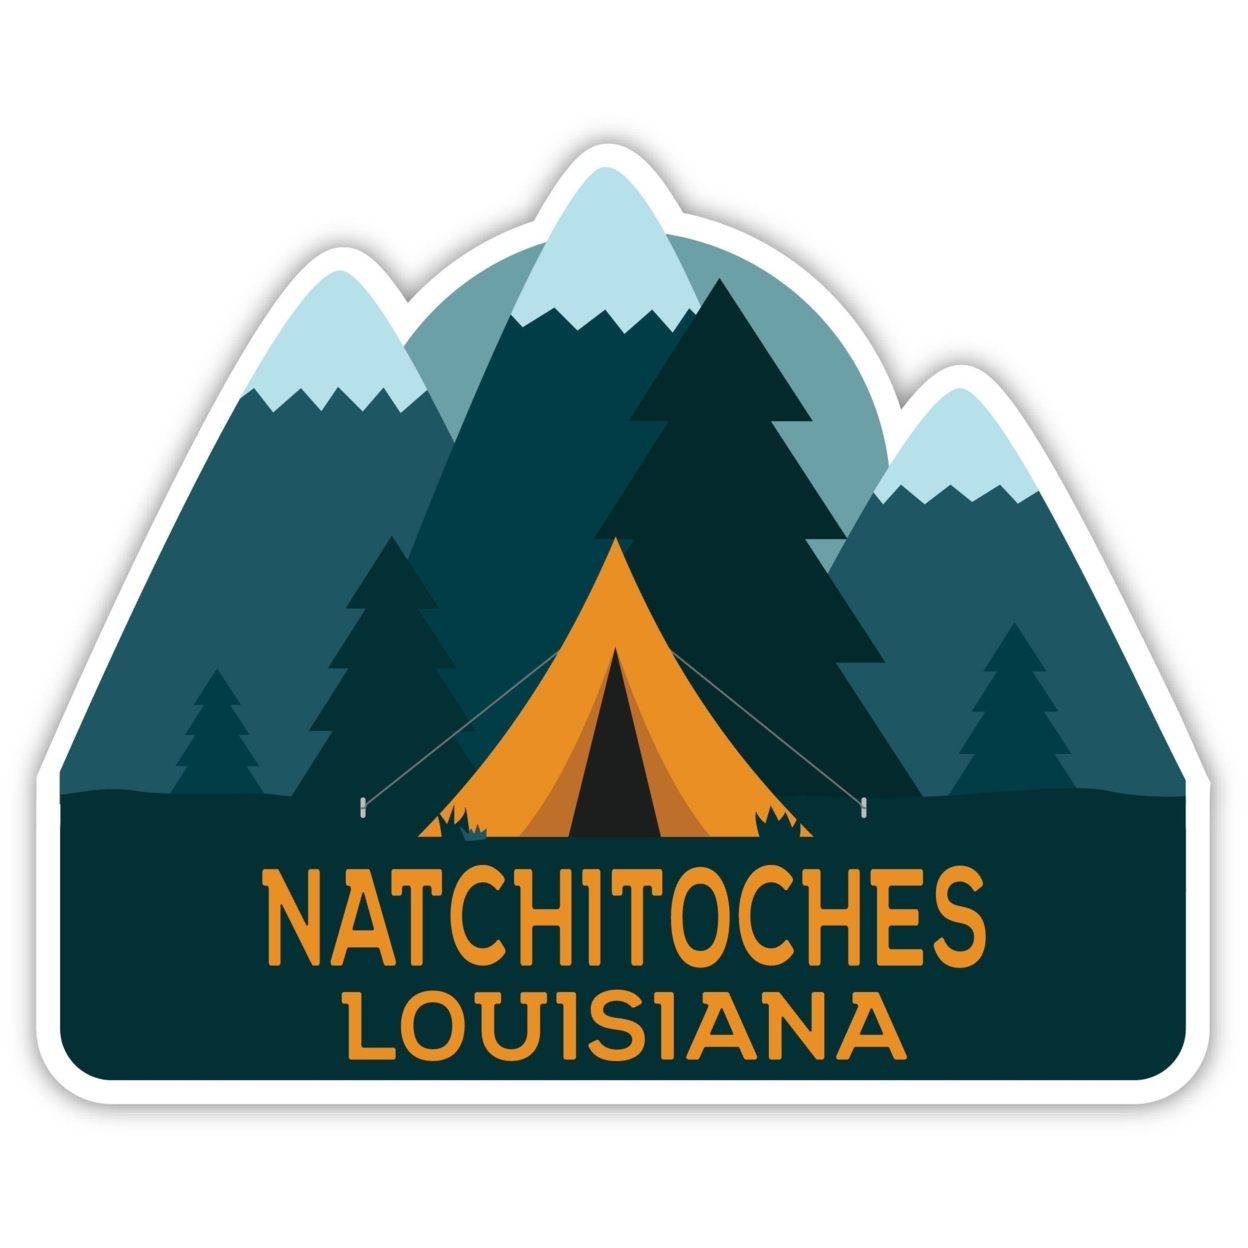 Natchitoches Louisiana Souvenir Decorative Stickers (Choose Theme And Size) - Single Unit, 4-Inch, Adventures Awaits